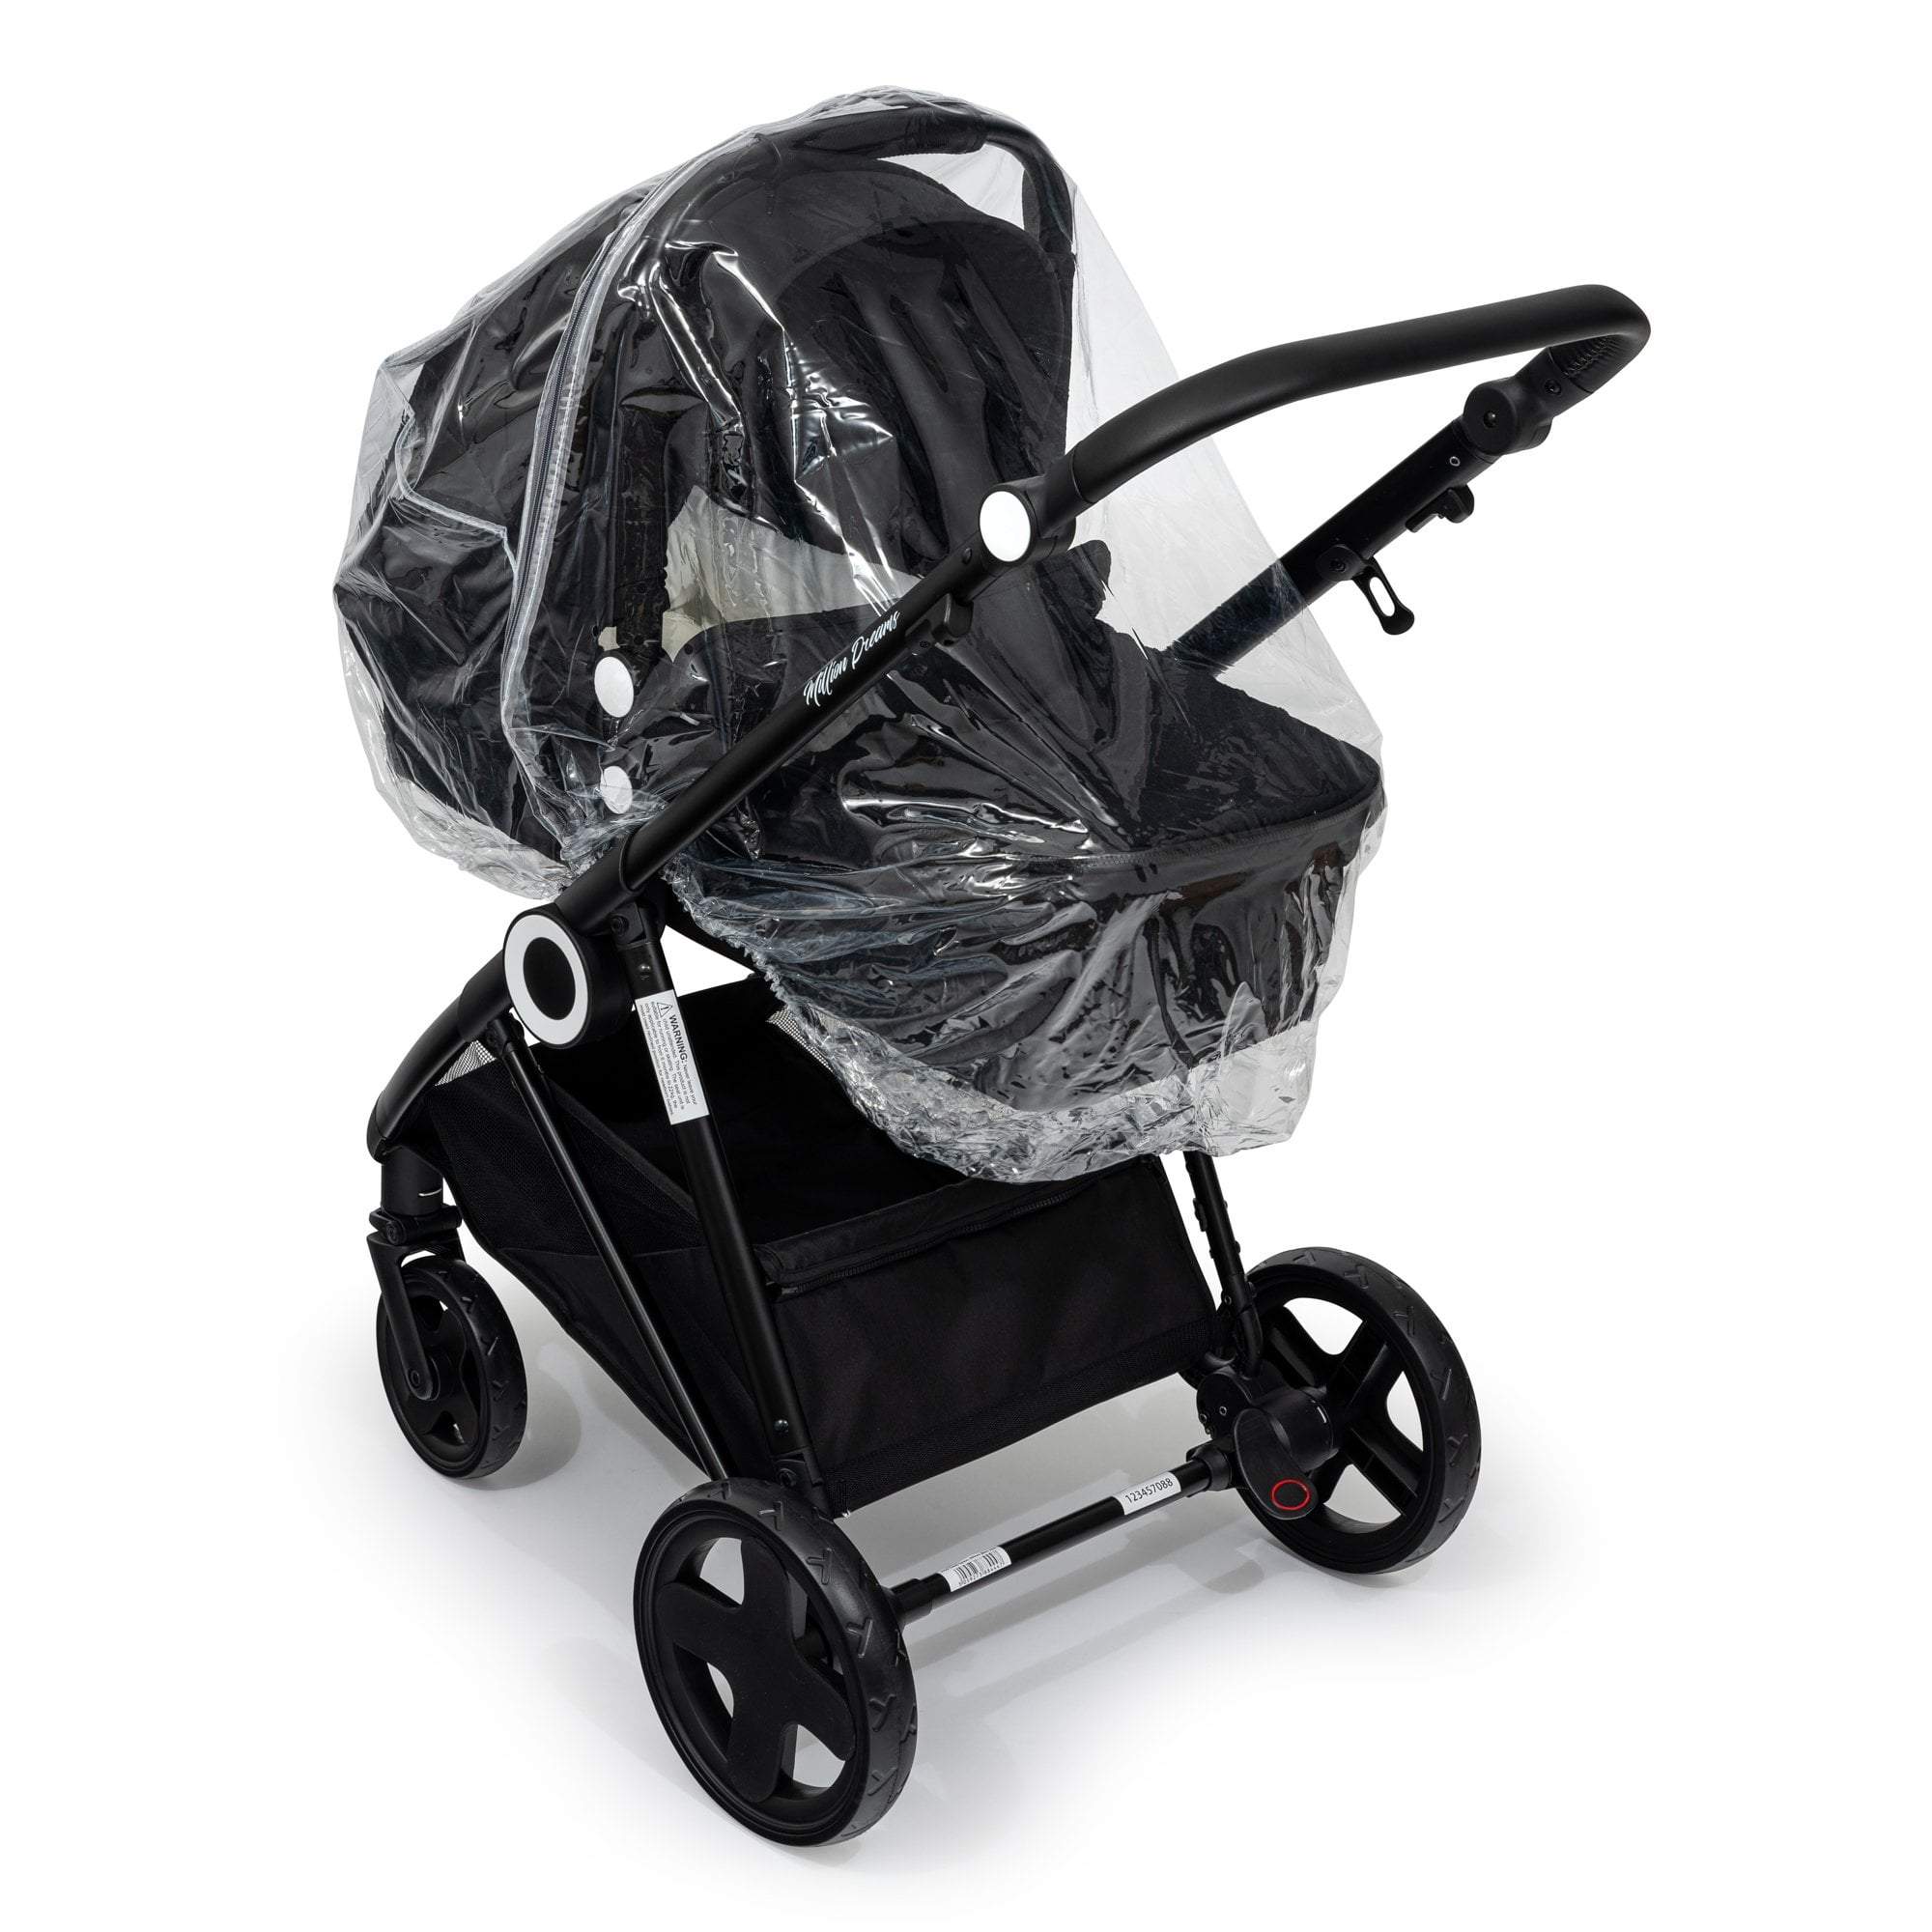 Carrycot Raincover Compatible With Bumbleride - Fits All Models - For Your Little One